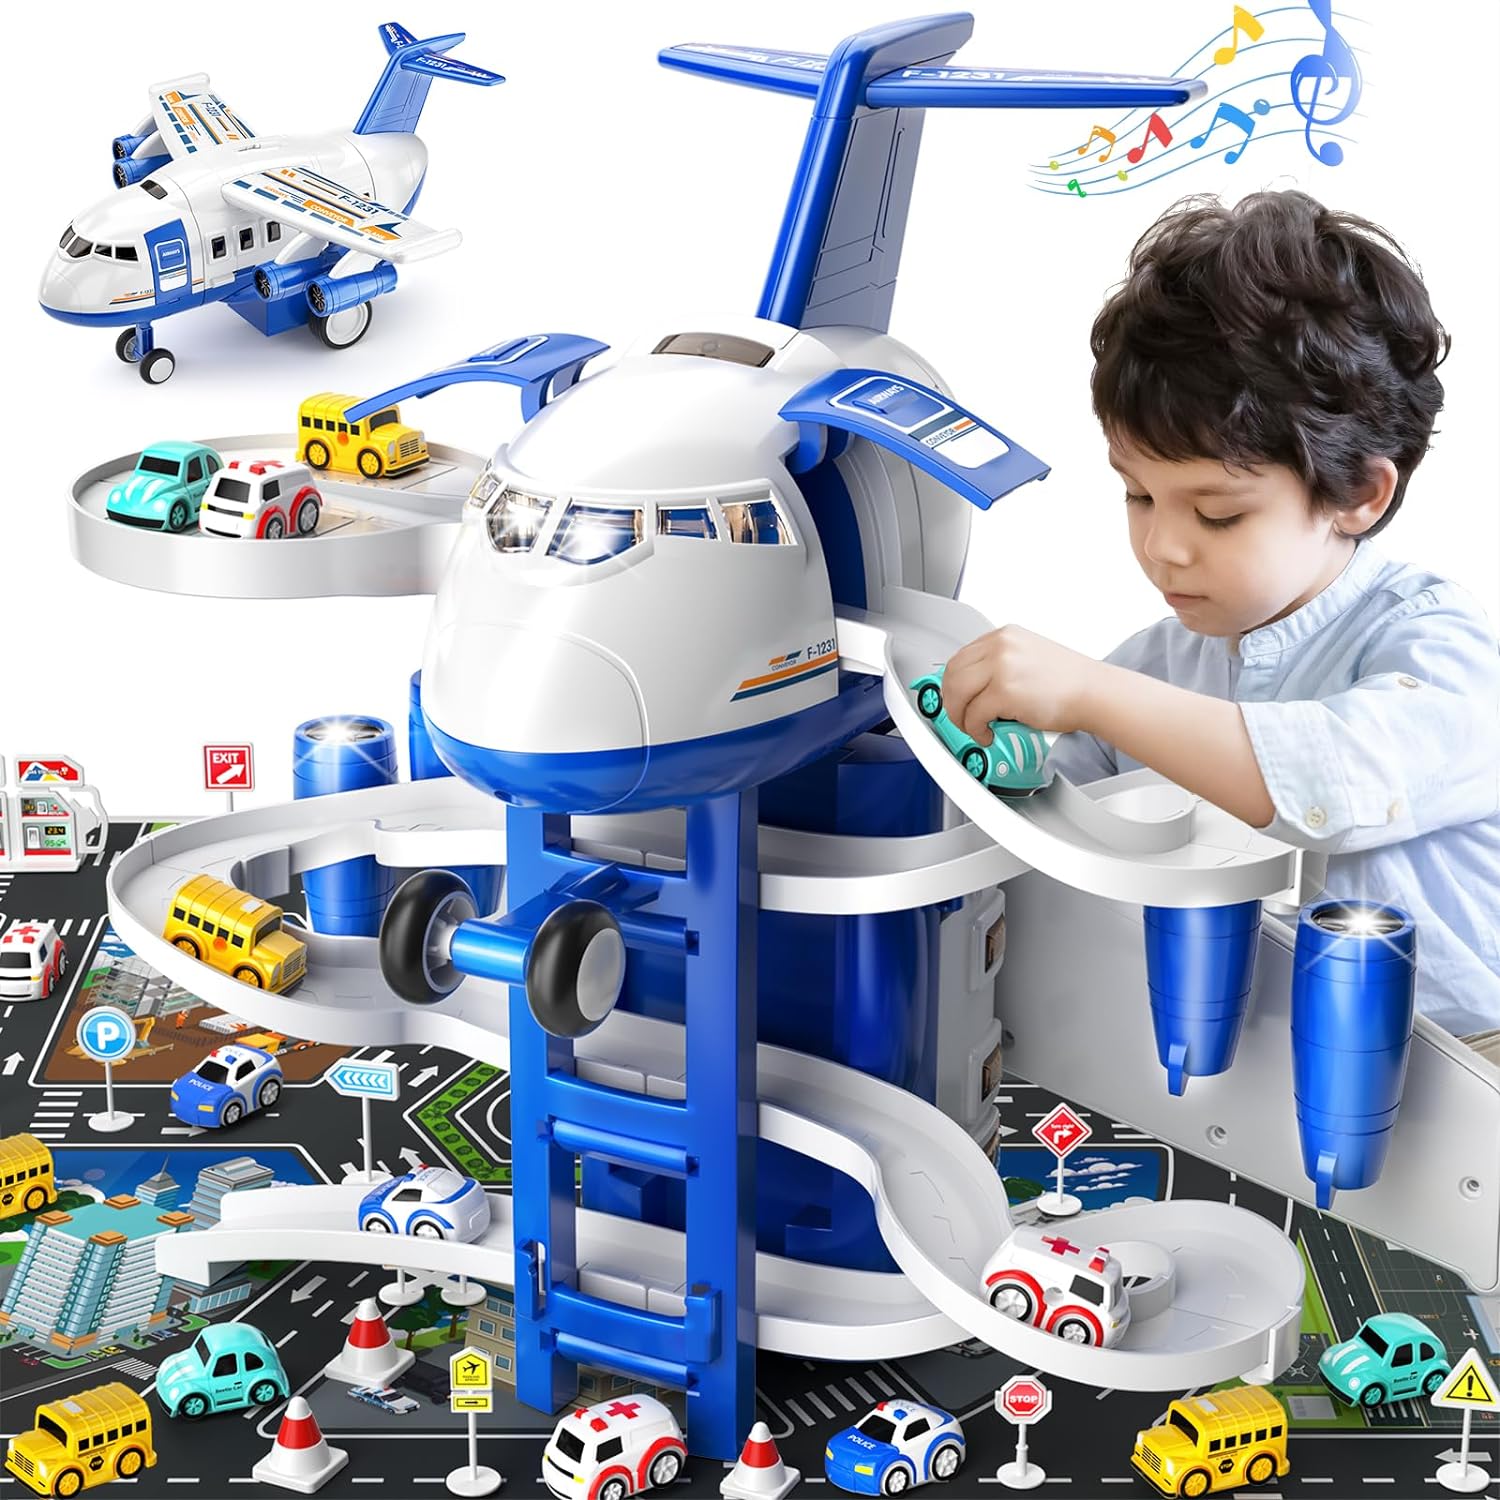 Kids Toys Airplane Toys Race Track Car, with 8 City Cars, Garage Parking Lot Playmat, Birthday Gift for Girls